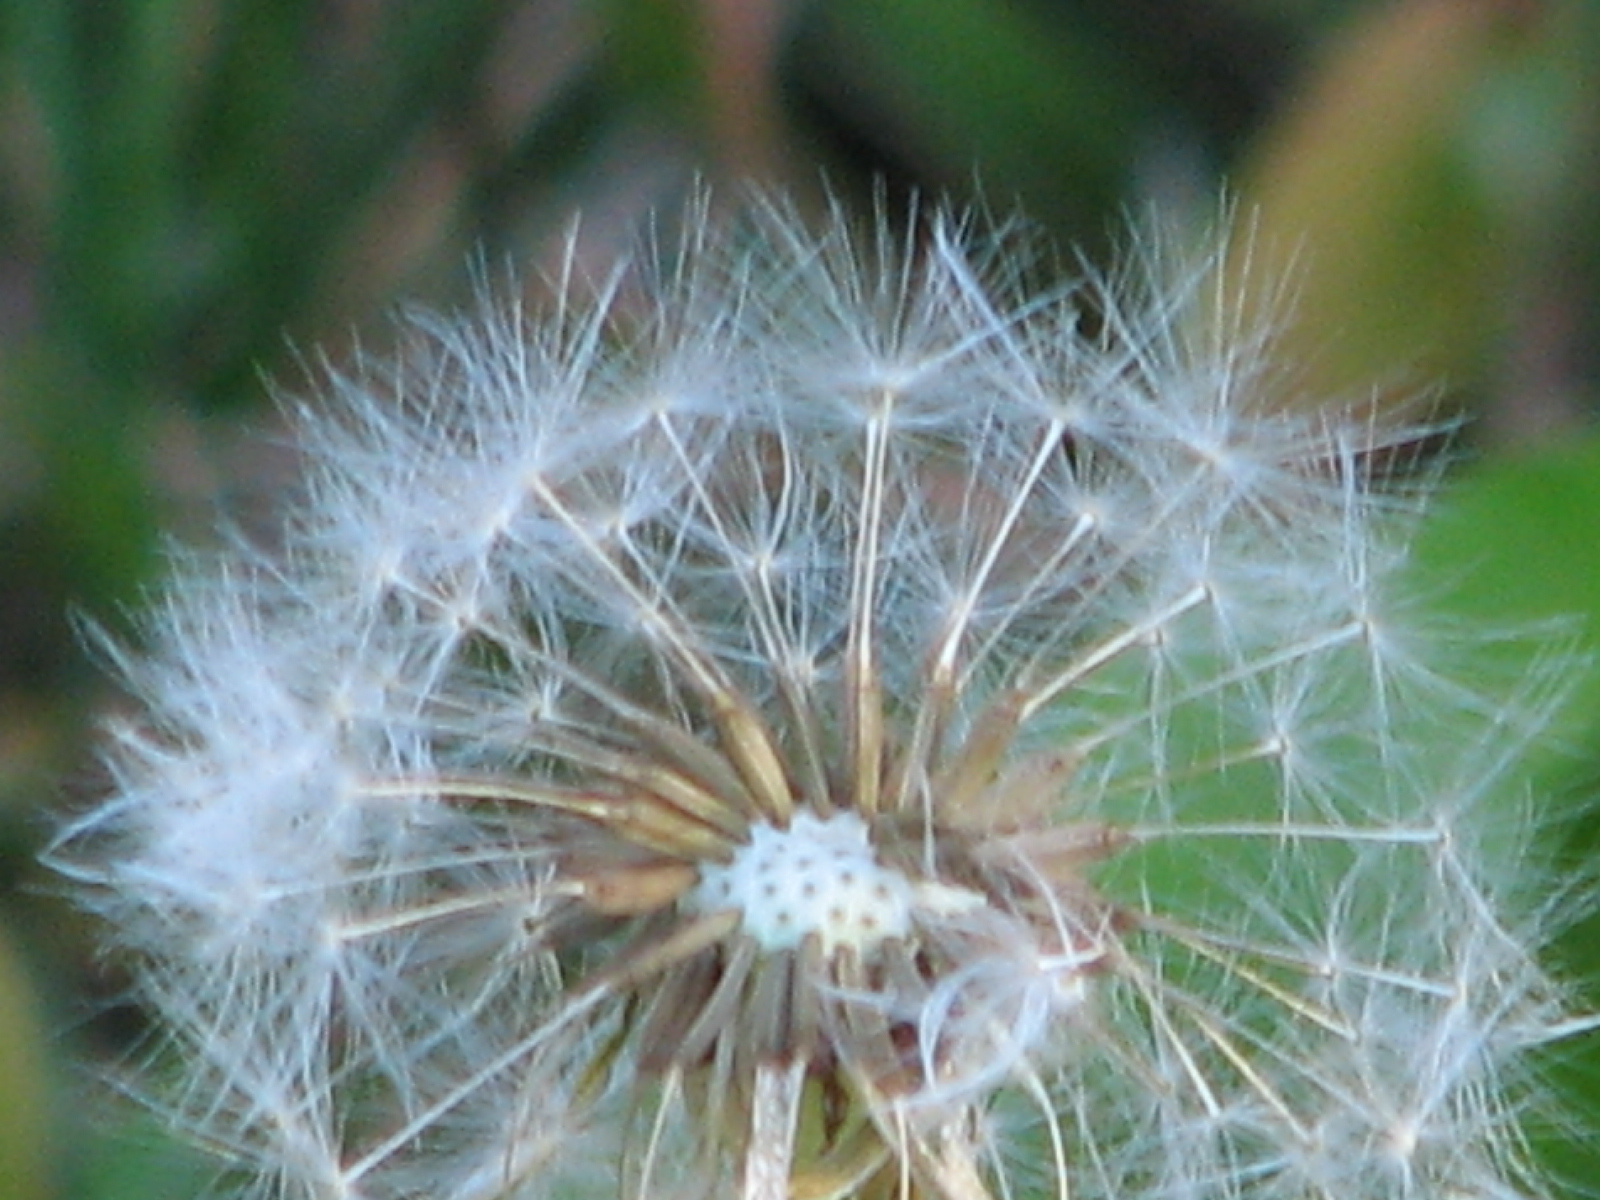 this is a close up of a dandelion